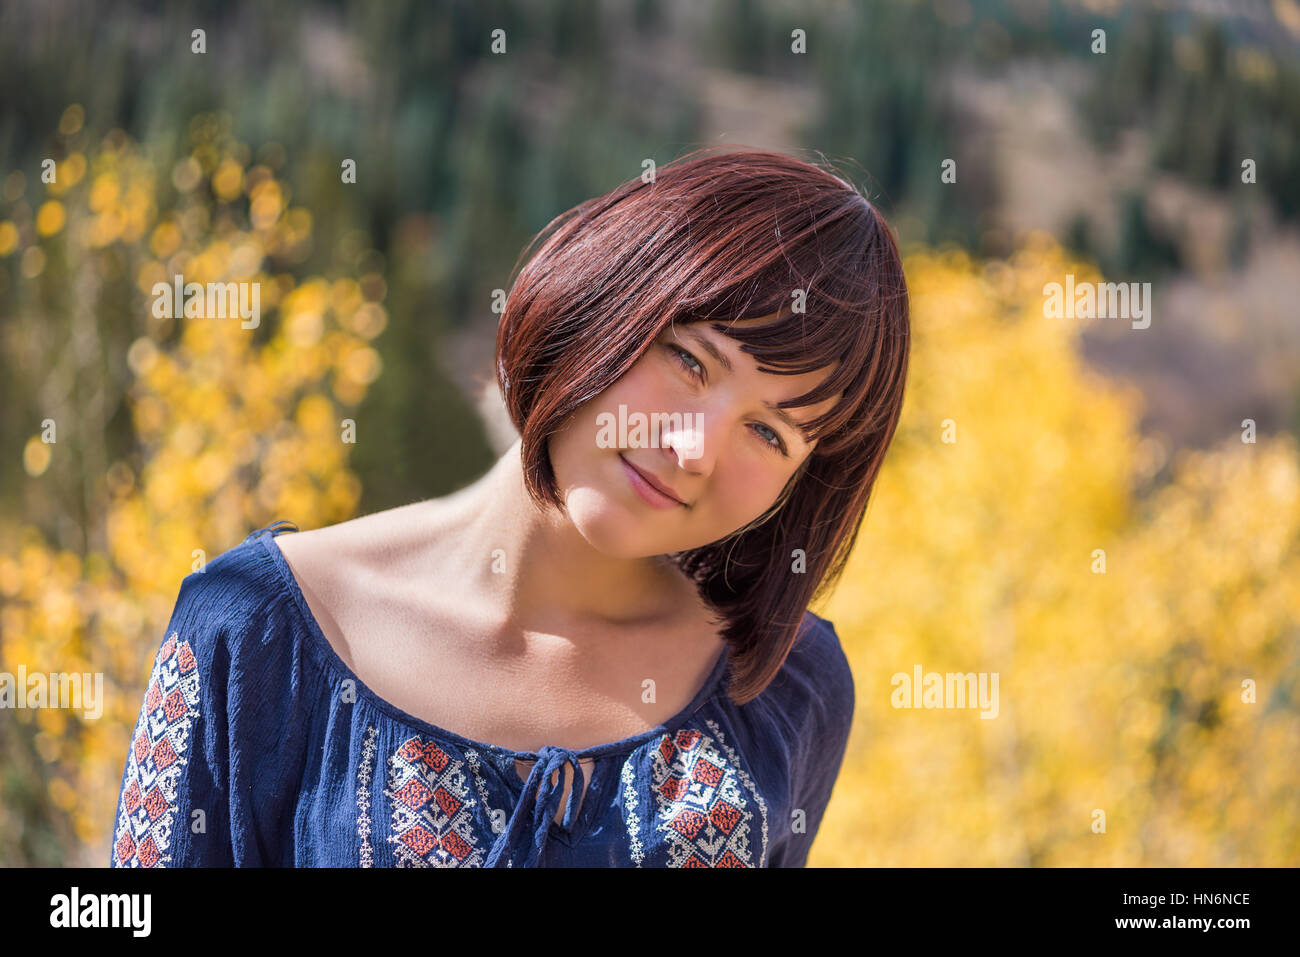 Portrait of young happy smiling woman with purple plum hair by autumn aspen trees with head tilted Stock Photo